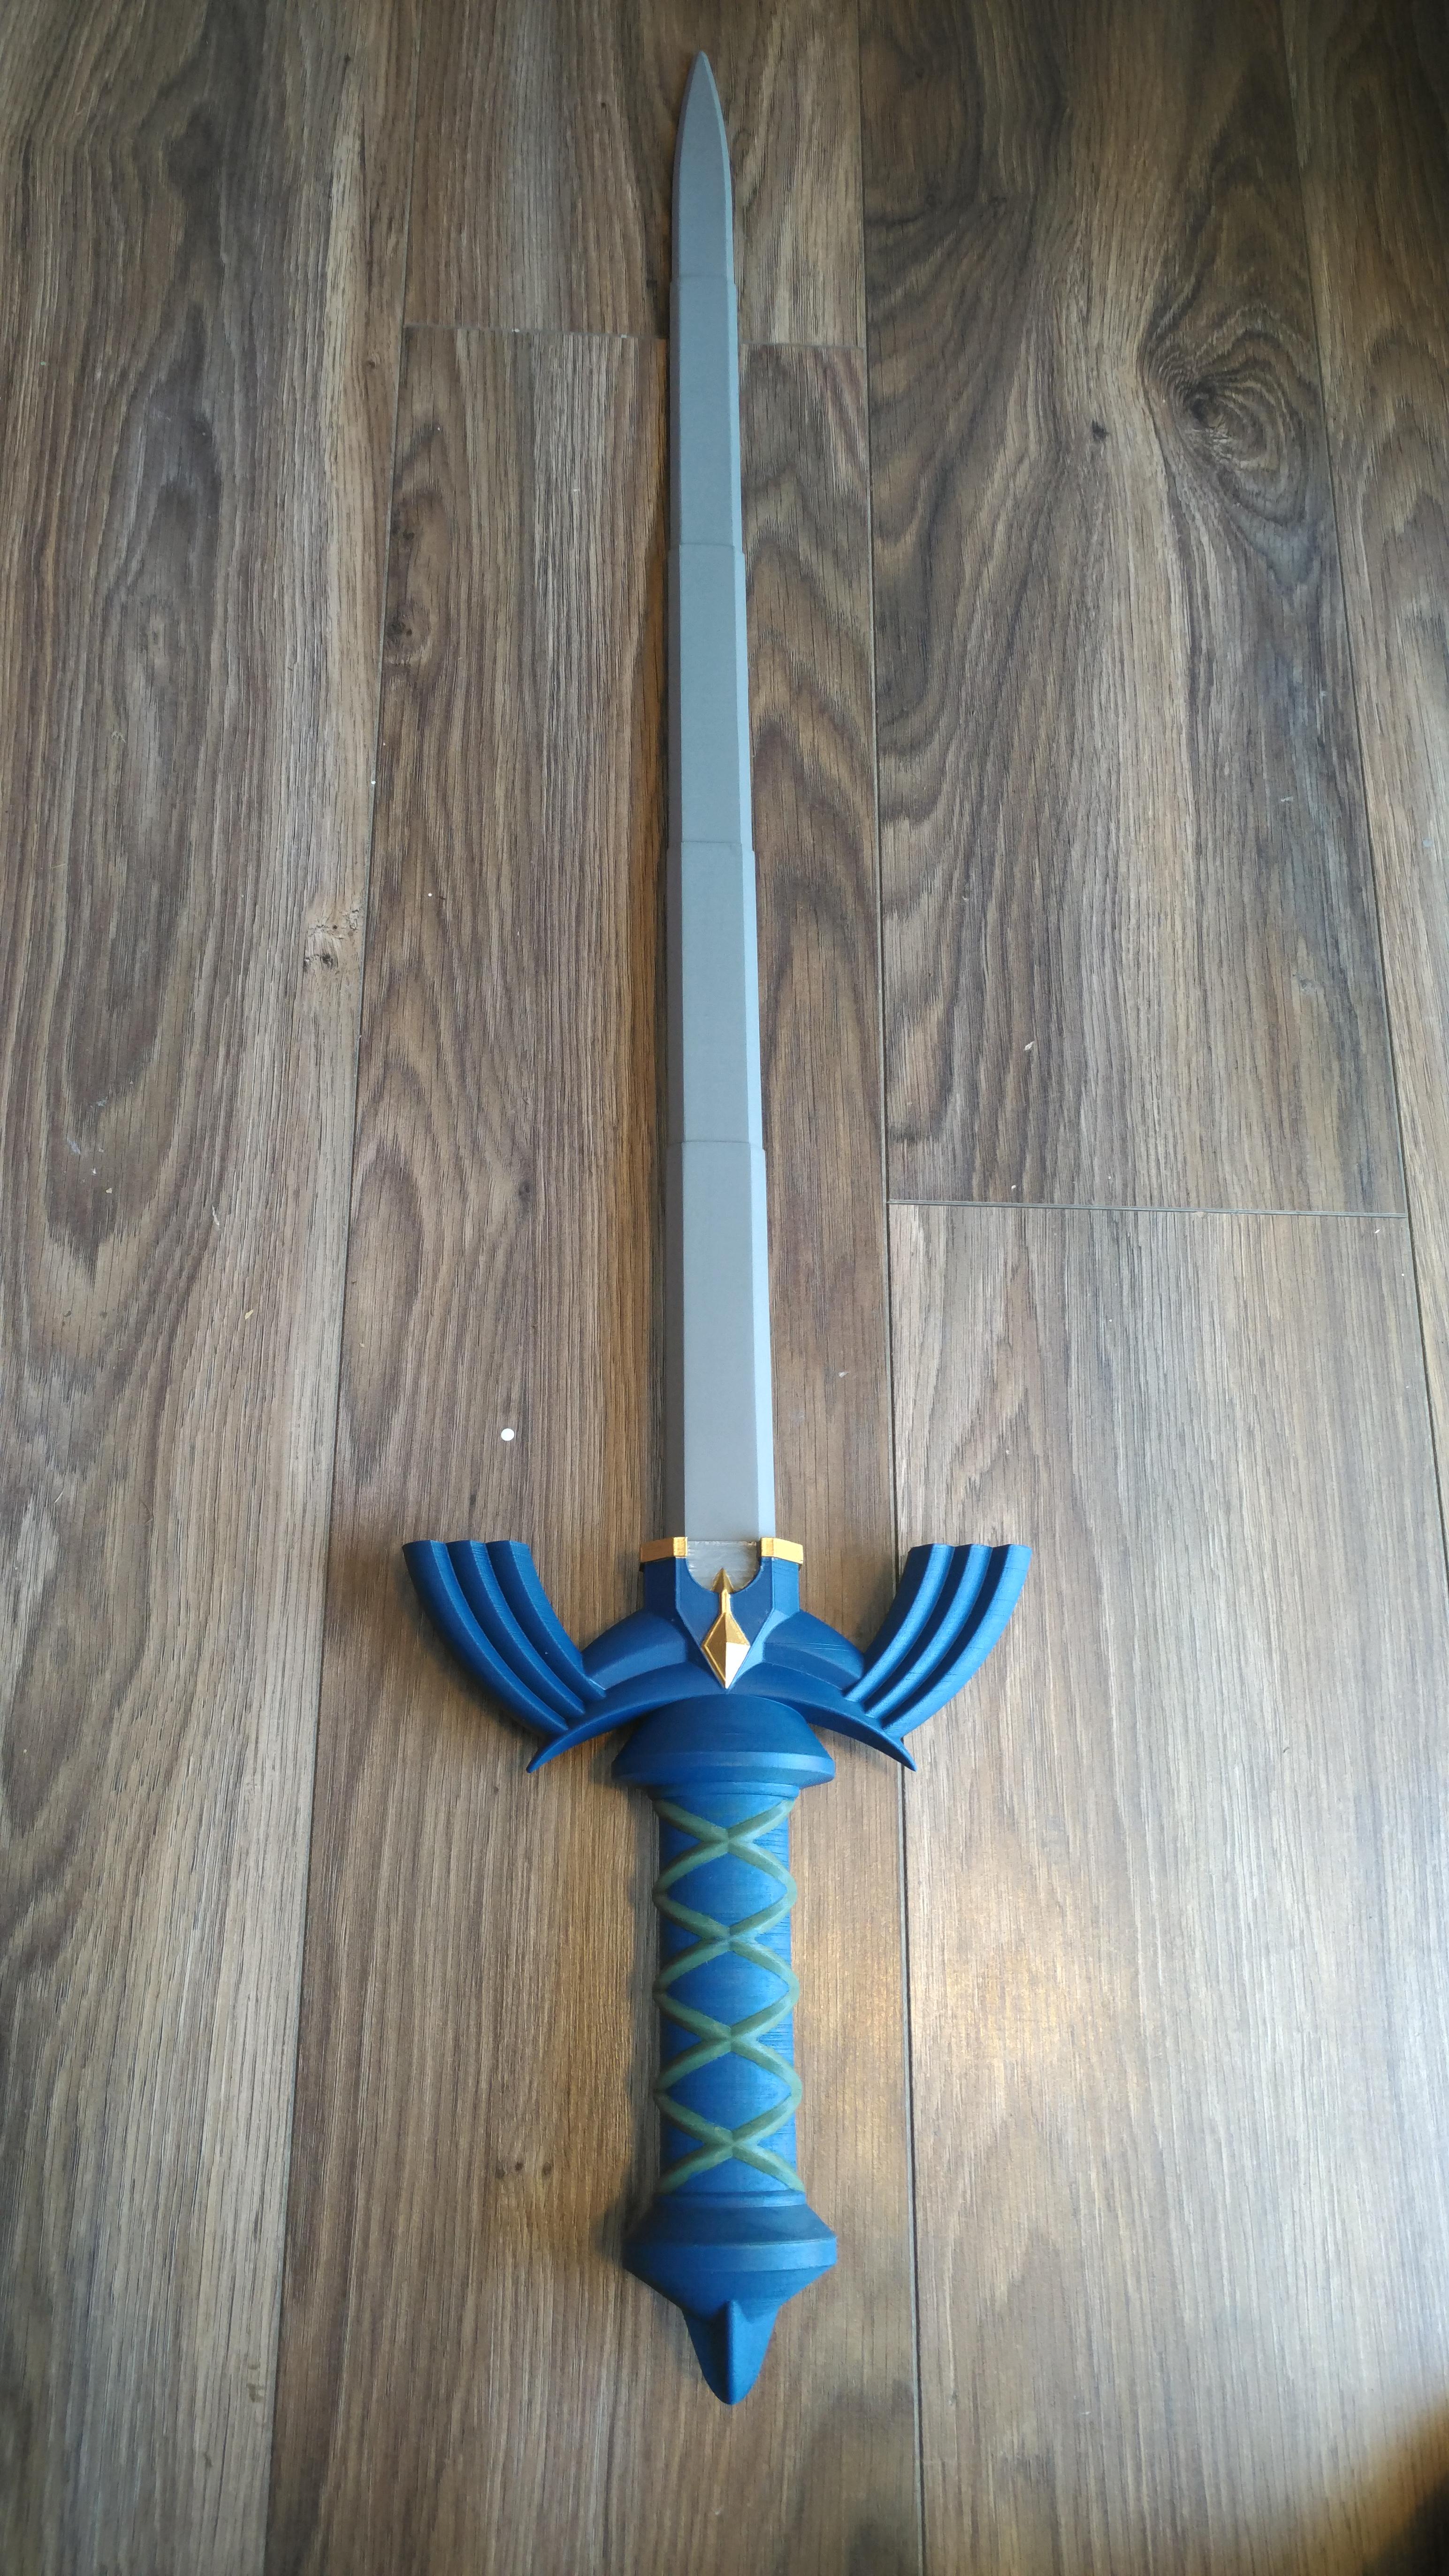 Collapsing Master Sword with Replaceable Blade 3d model